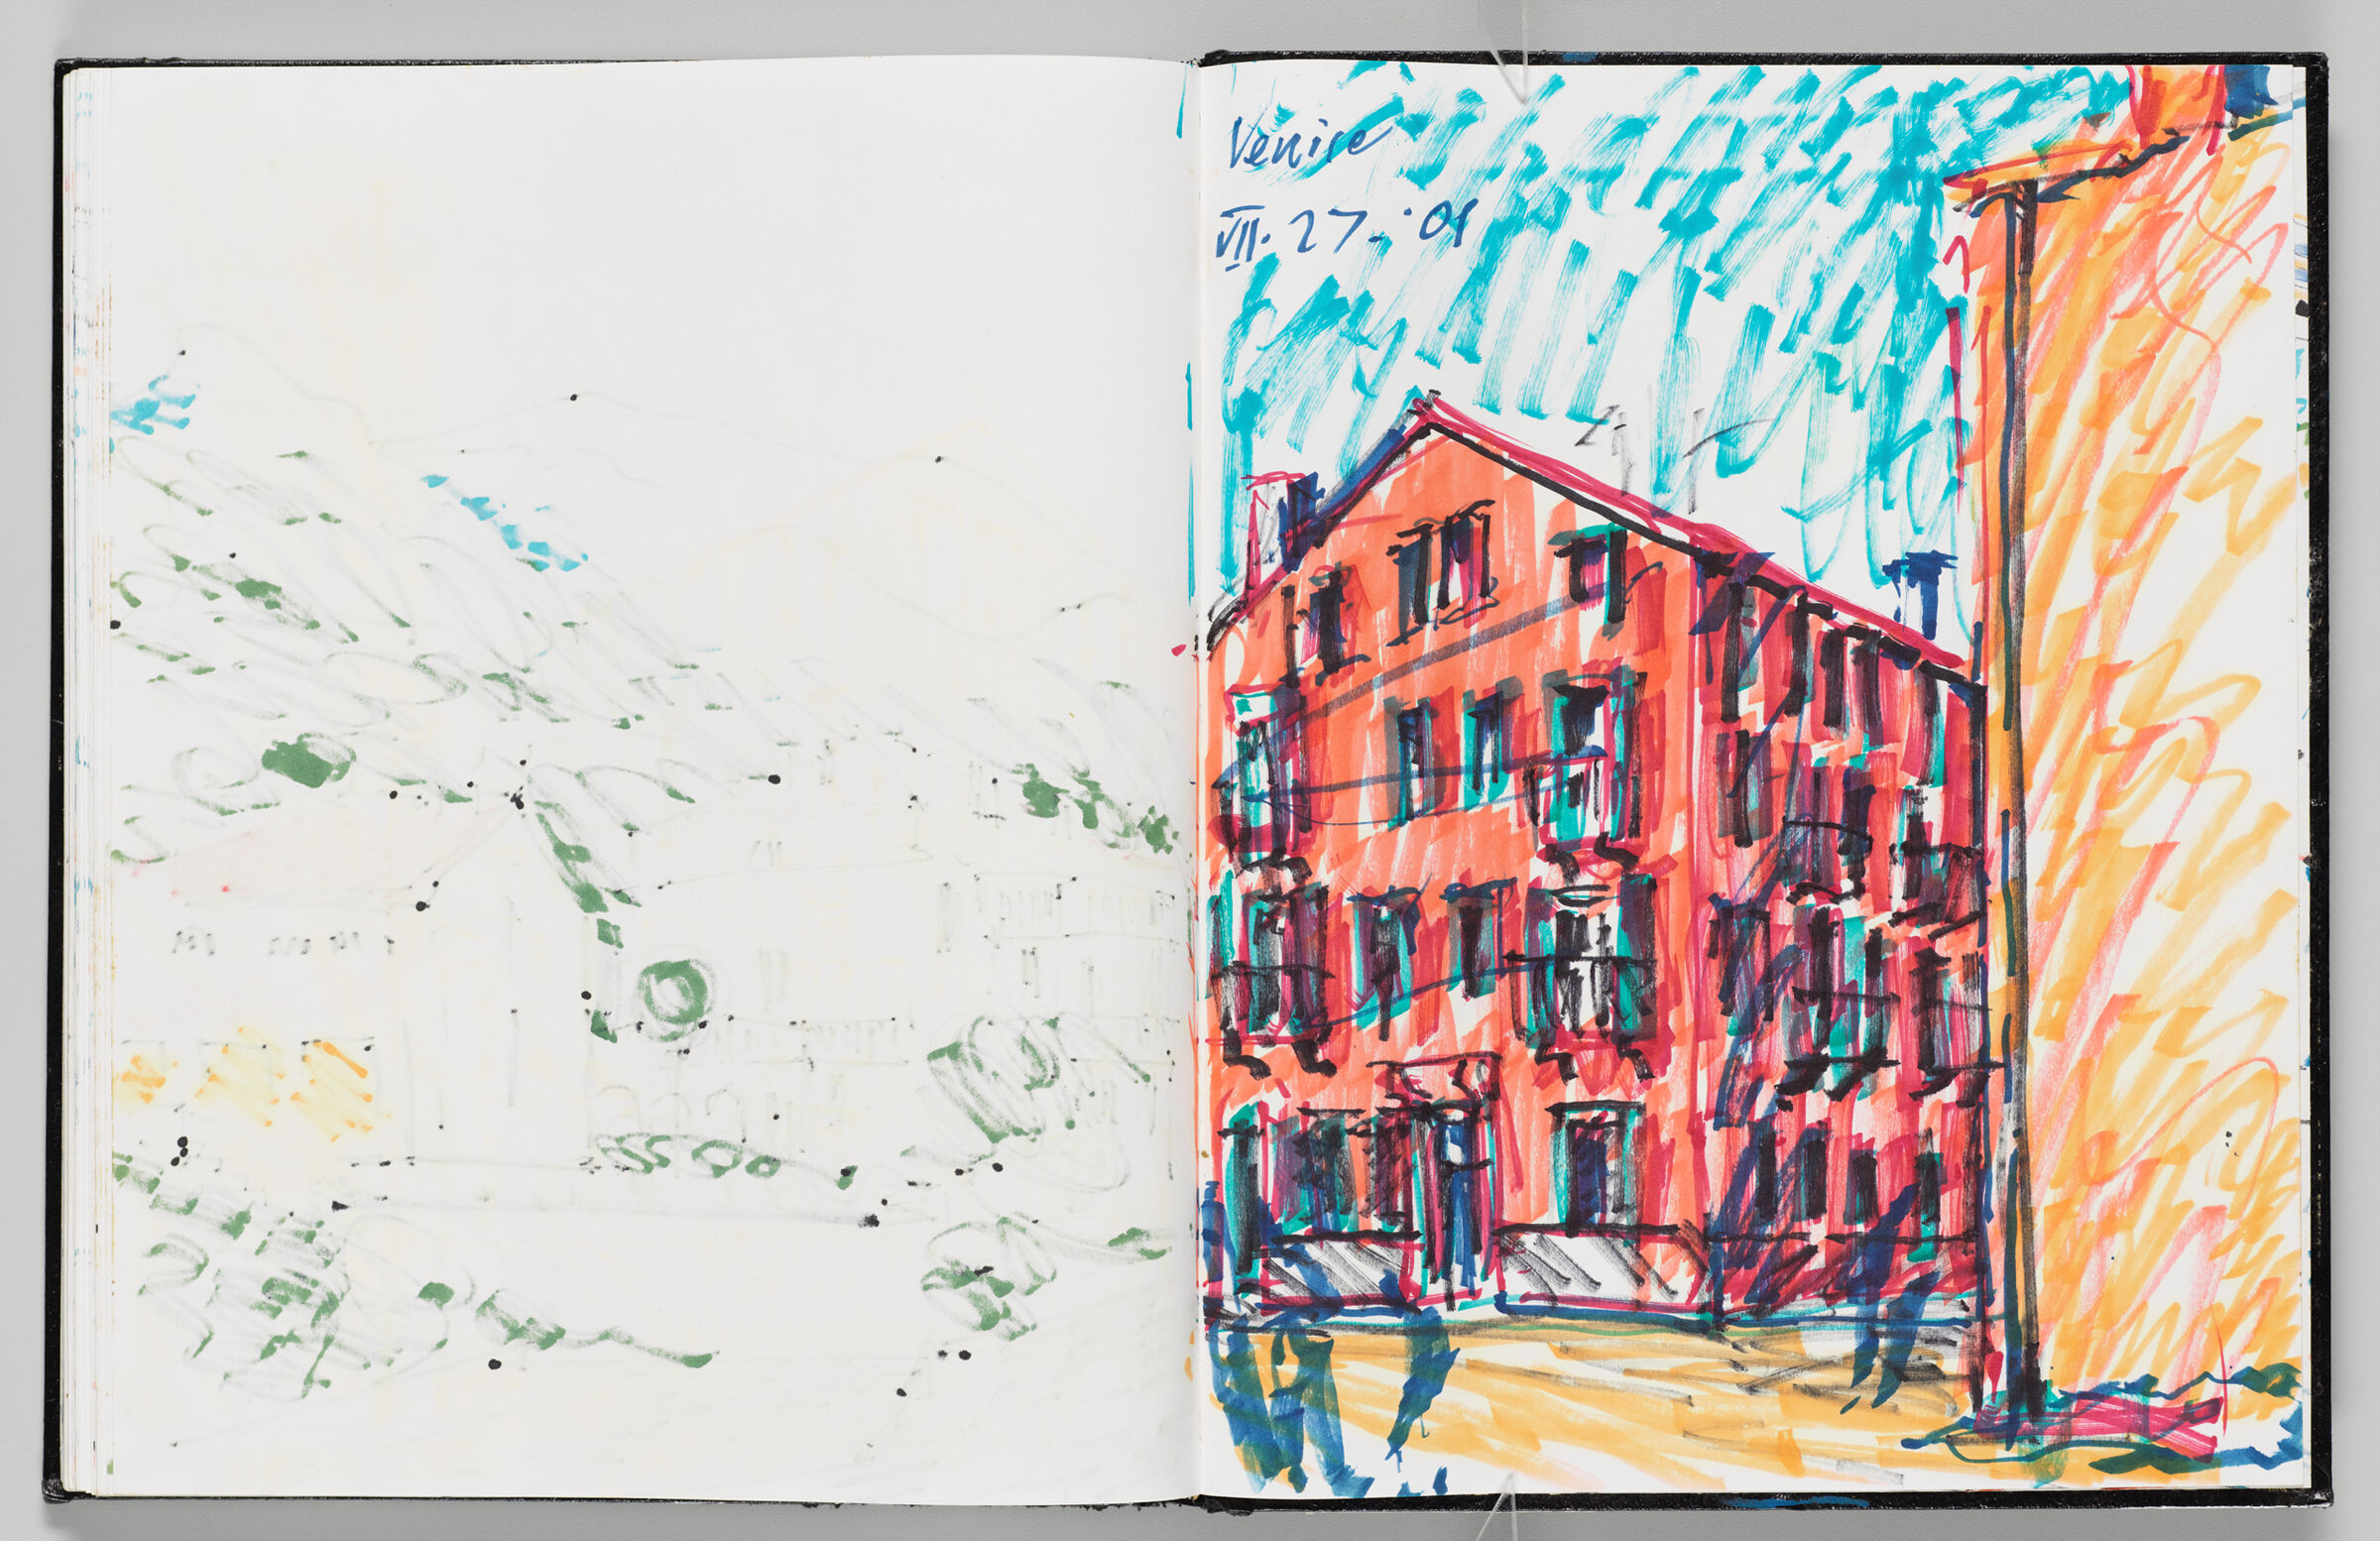 Untitled (Bleed-Through From Previous Page, Left Page); Untitled (View Of Venice, Right Page)